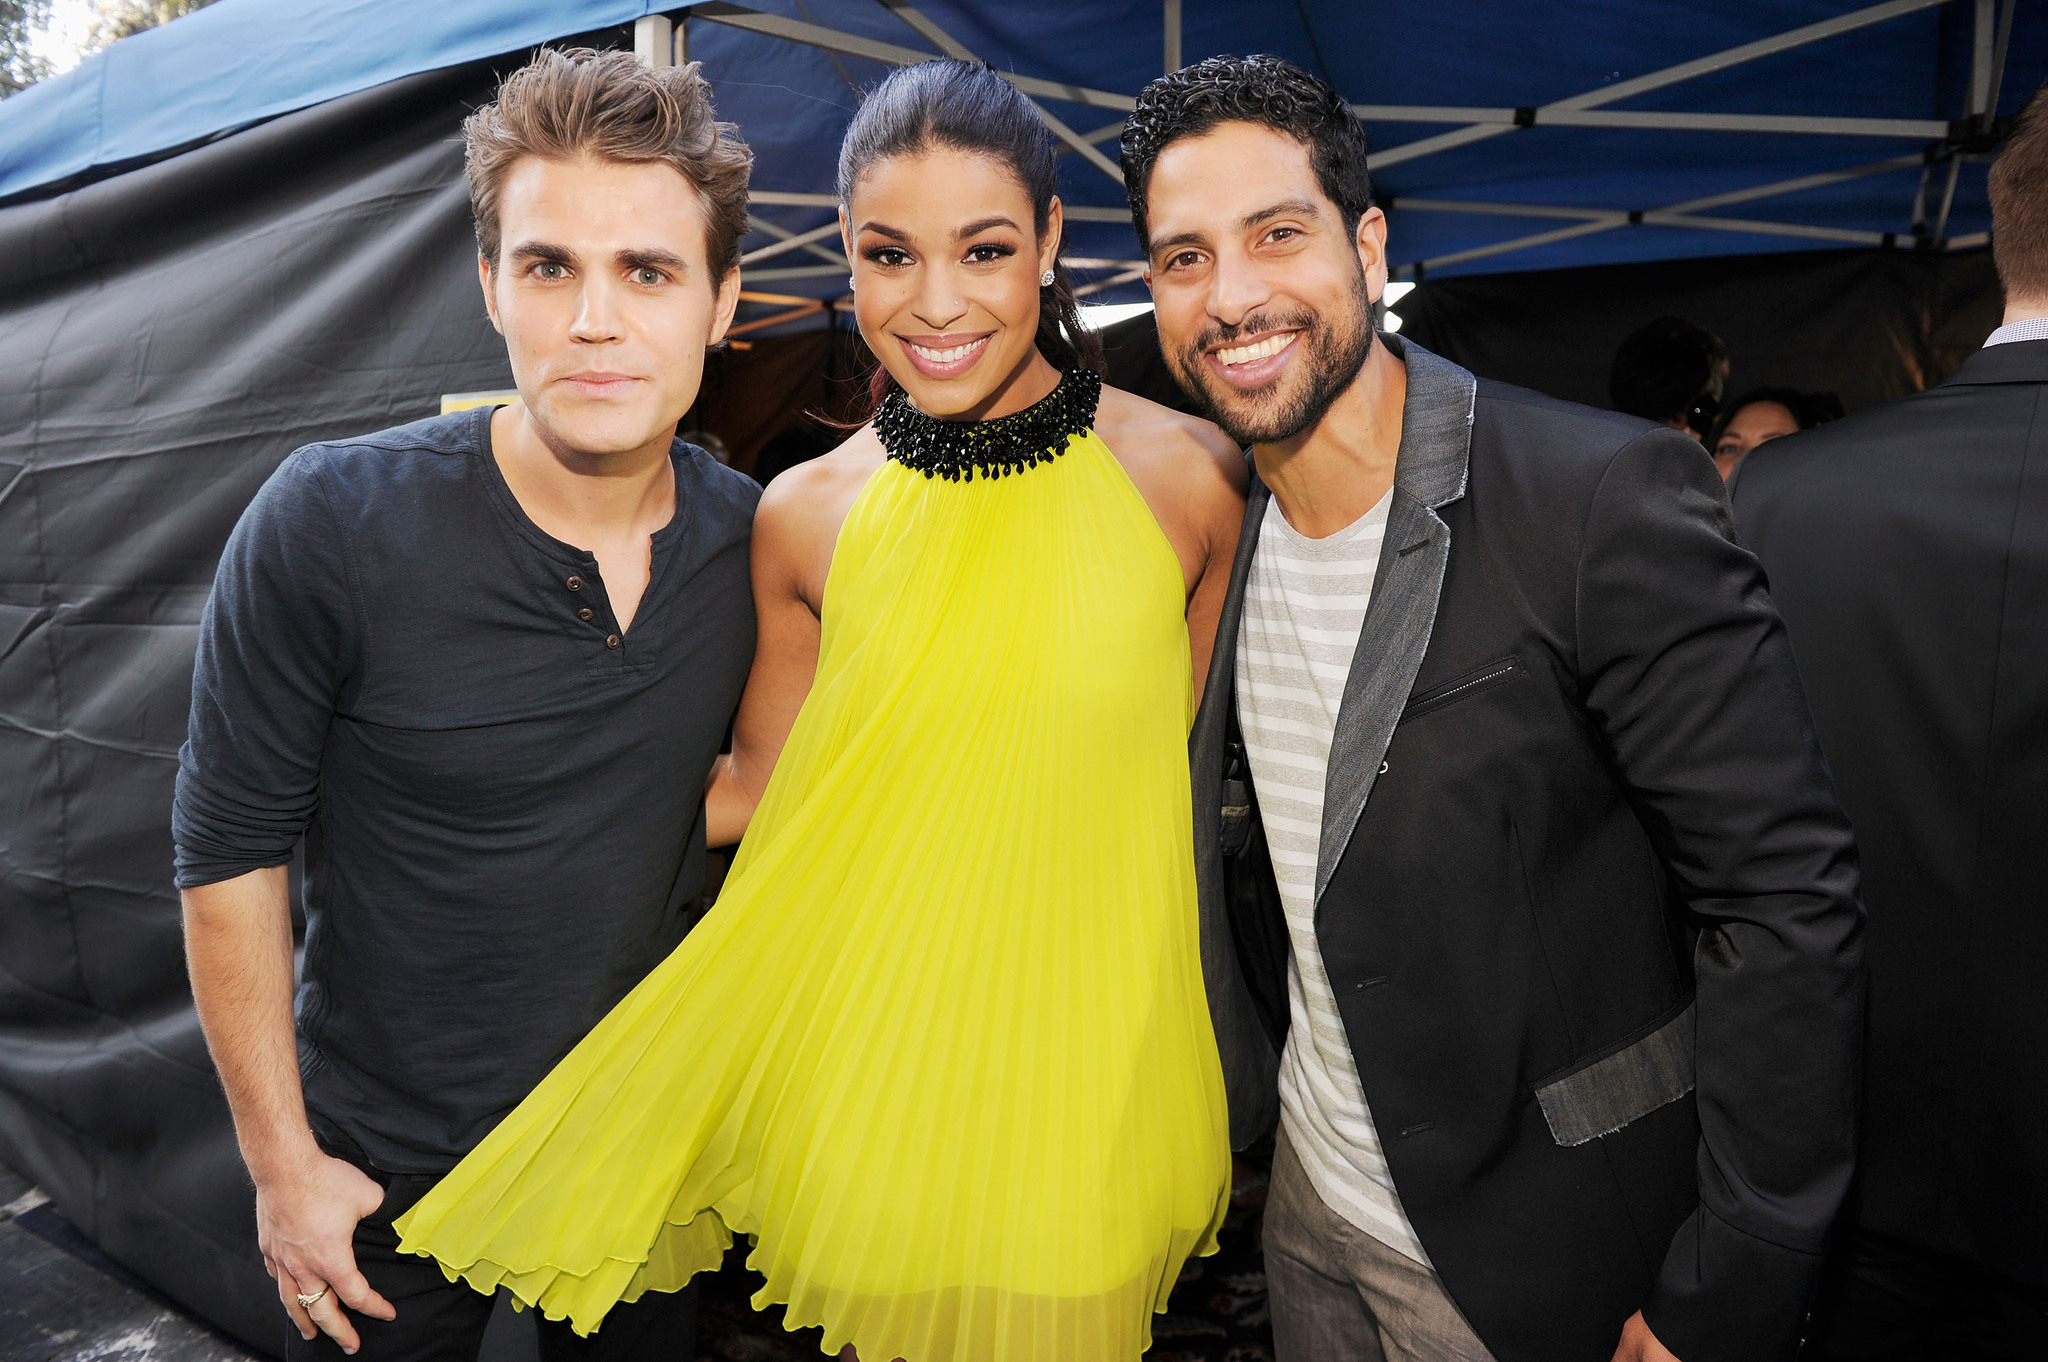 Adam Rodriguez, Paul Wesley and Jordin Sparks at event of Teen Choice Awards 2012 (2012)